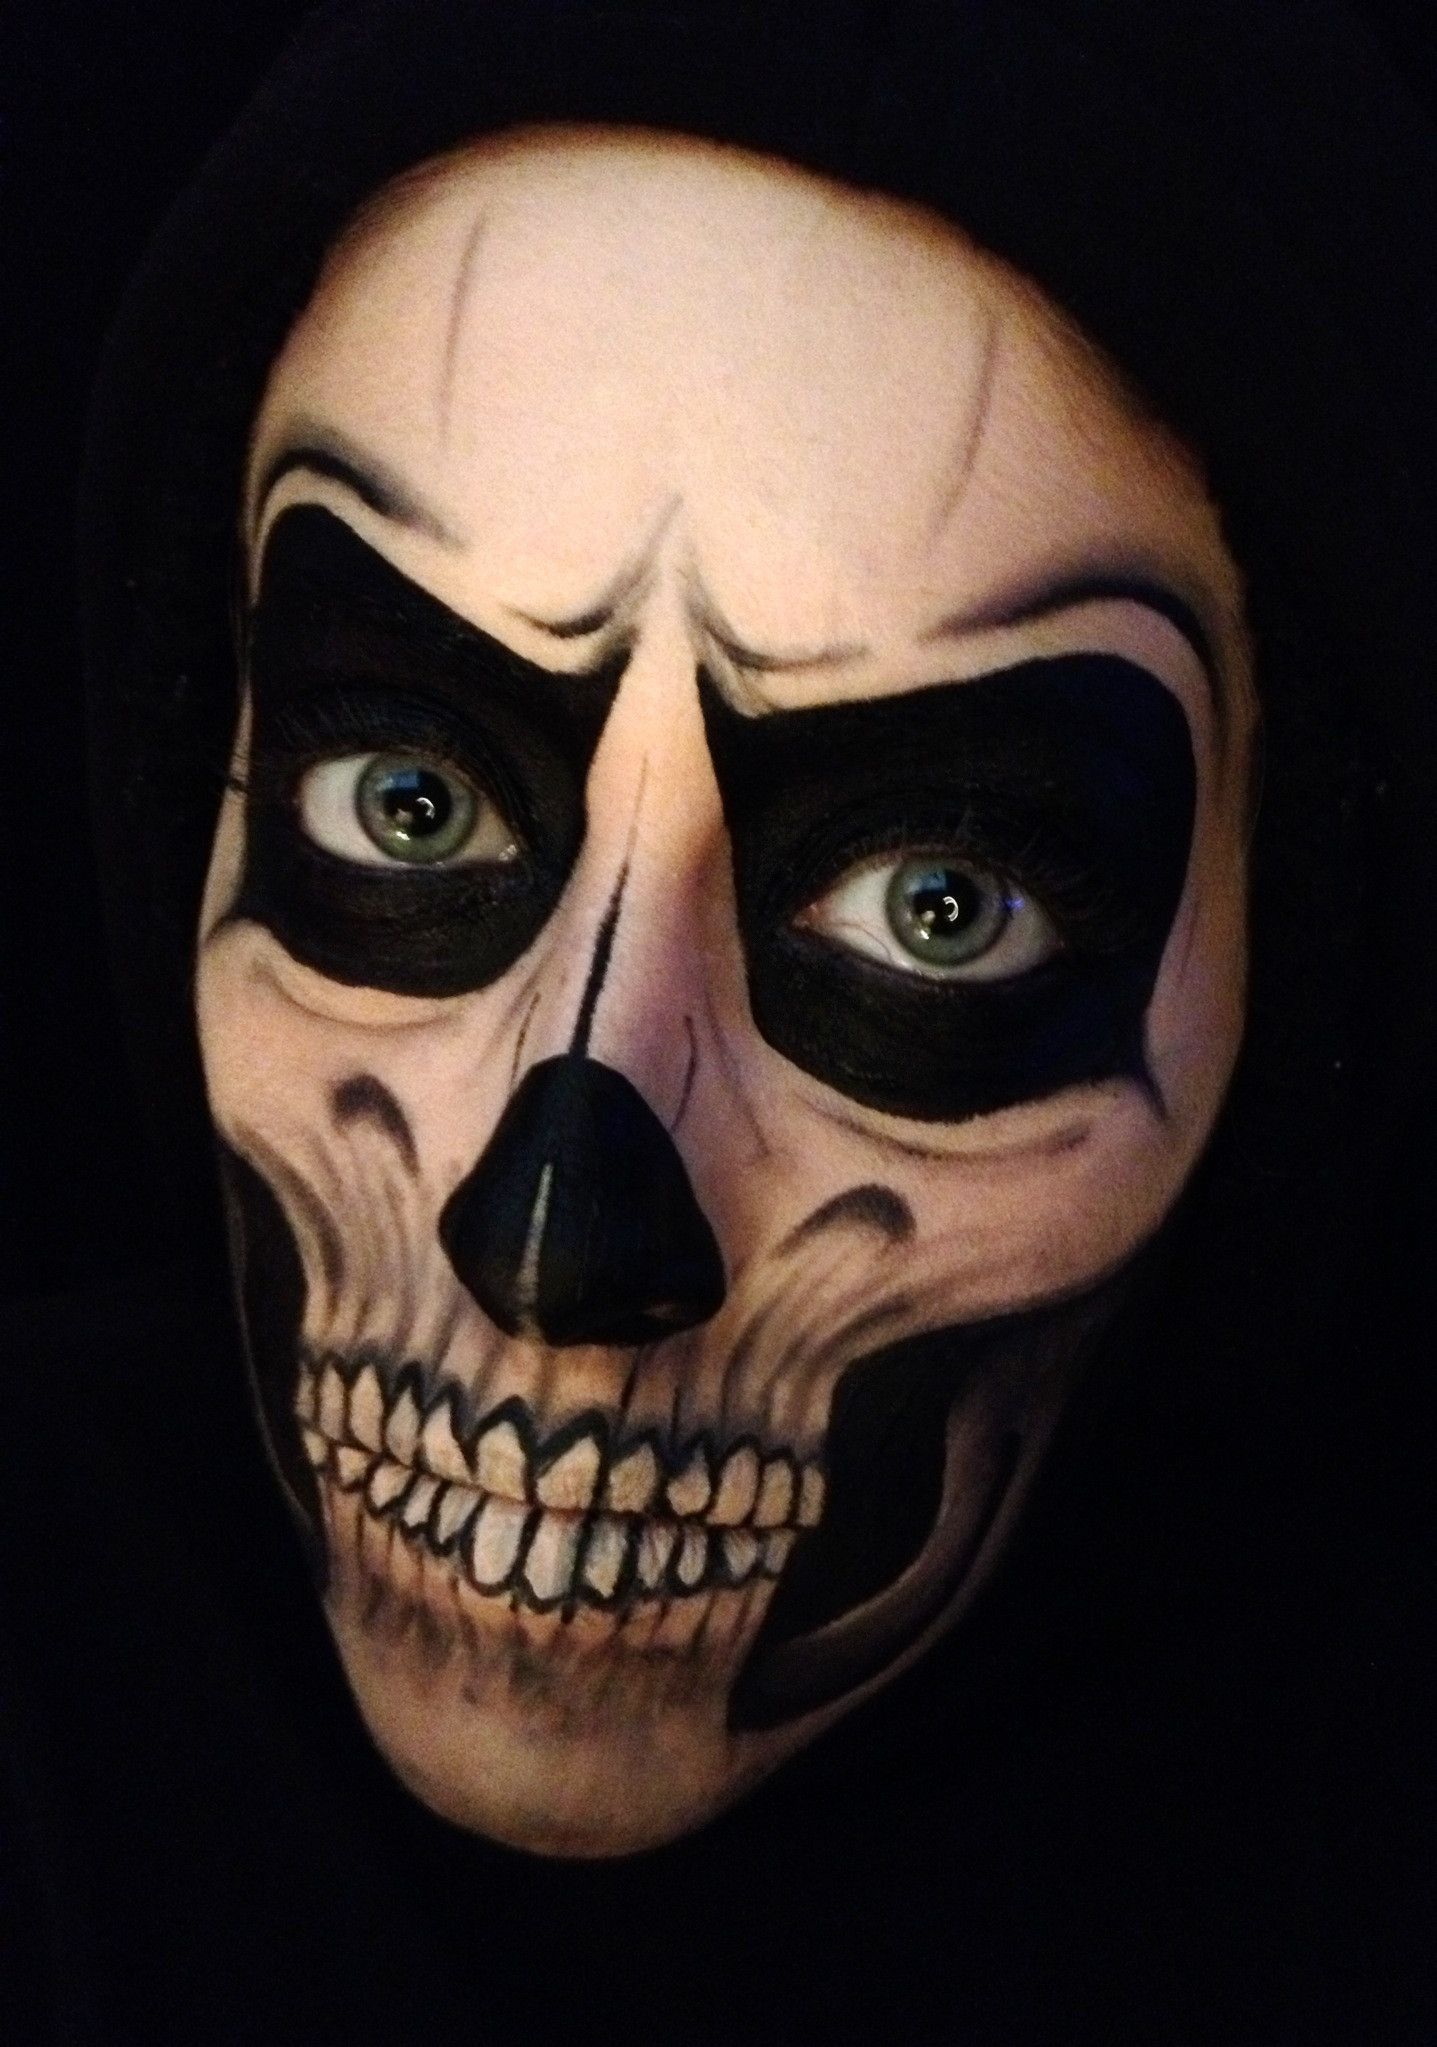 Scary Skull or Day of the Dead | Face Painting Ideas | Pinterest ...